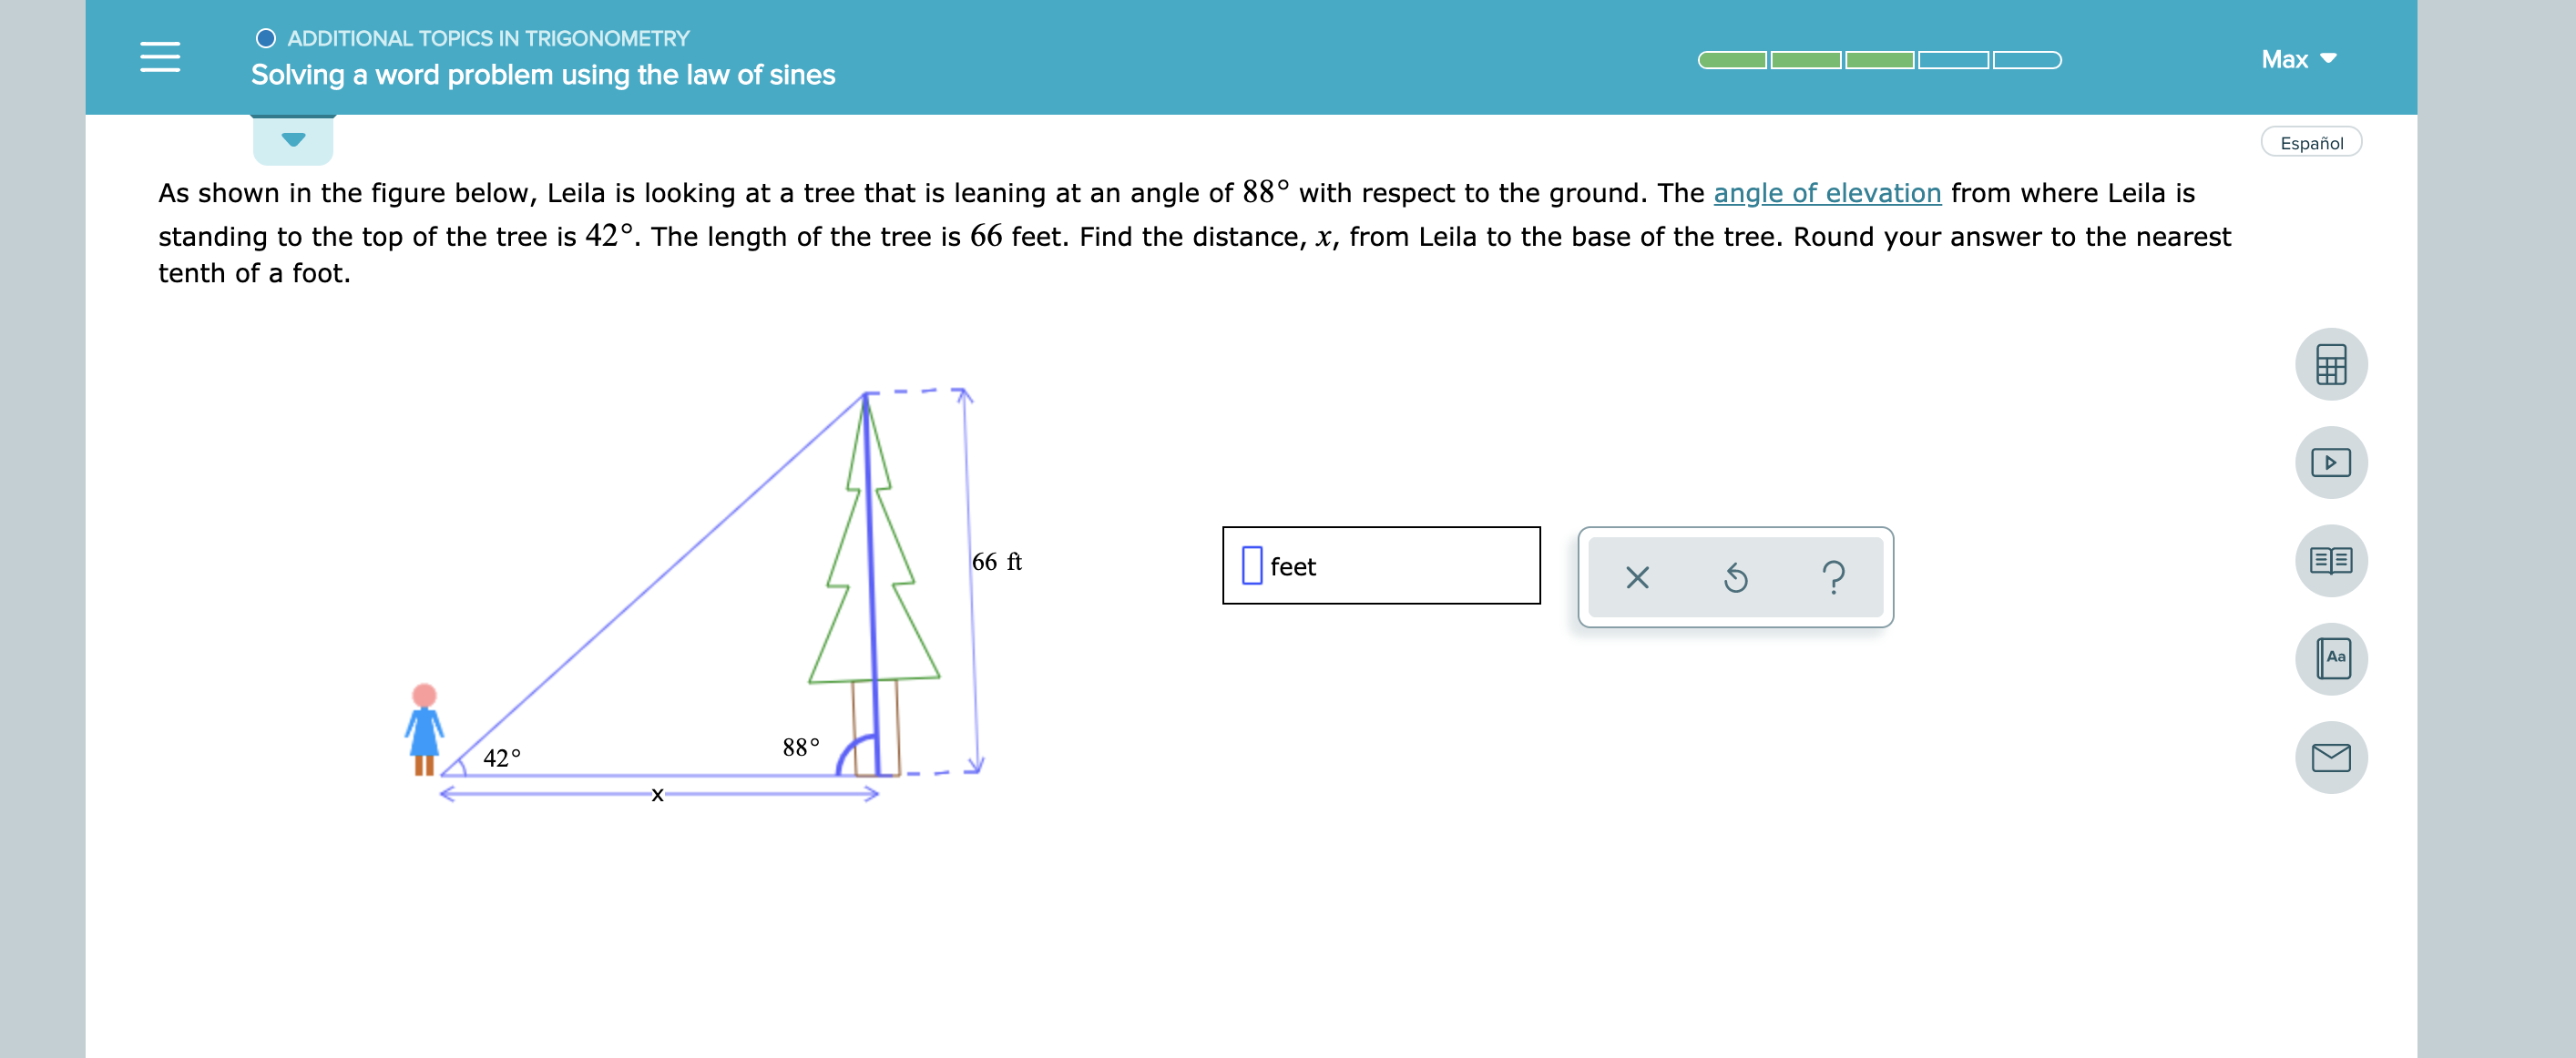 O ADDITIONAL TOPICS IN TRIGONOMETRY
Max
Solving a word problem using the law of sines
Español
angle of 88° with respect to the ground. The angle of elevation from where Leila is
As shown in the figure below, Leila is looking at a tree that is leaning at an
standing to the top of the tree is 42°. The length of the tree is 66 feet. Find the distance, x, from Leila to the base of the tree. Round your answer to the nearest
tenth of a foot.
BE
66 ft
feet
?
Aa
88°
42°
X
X
